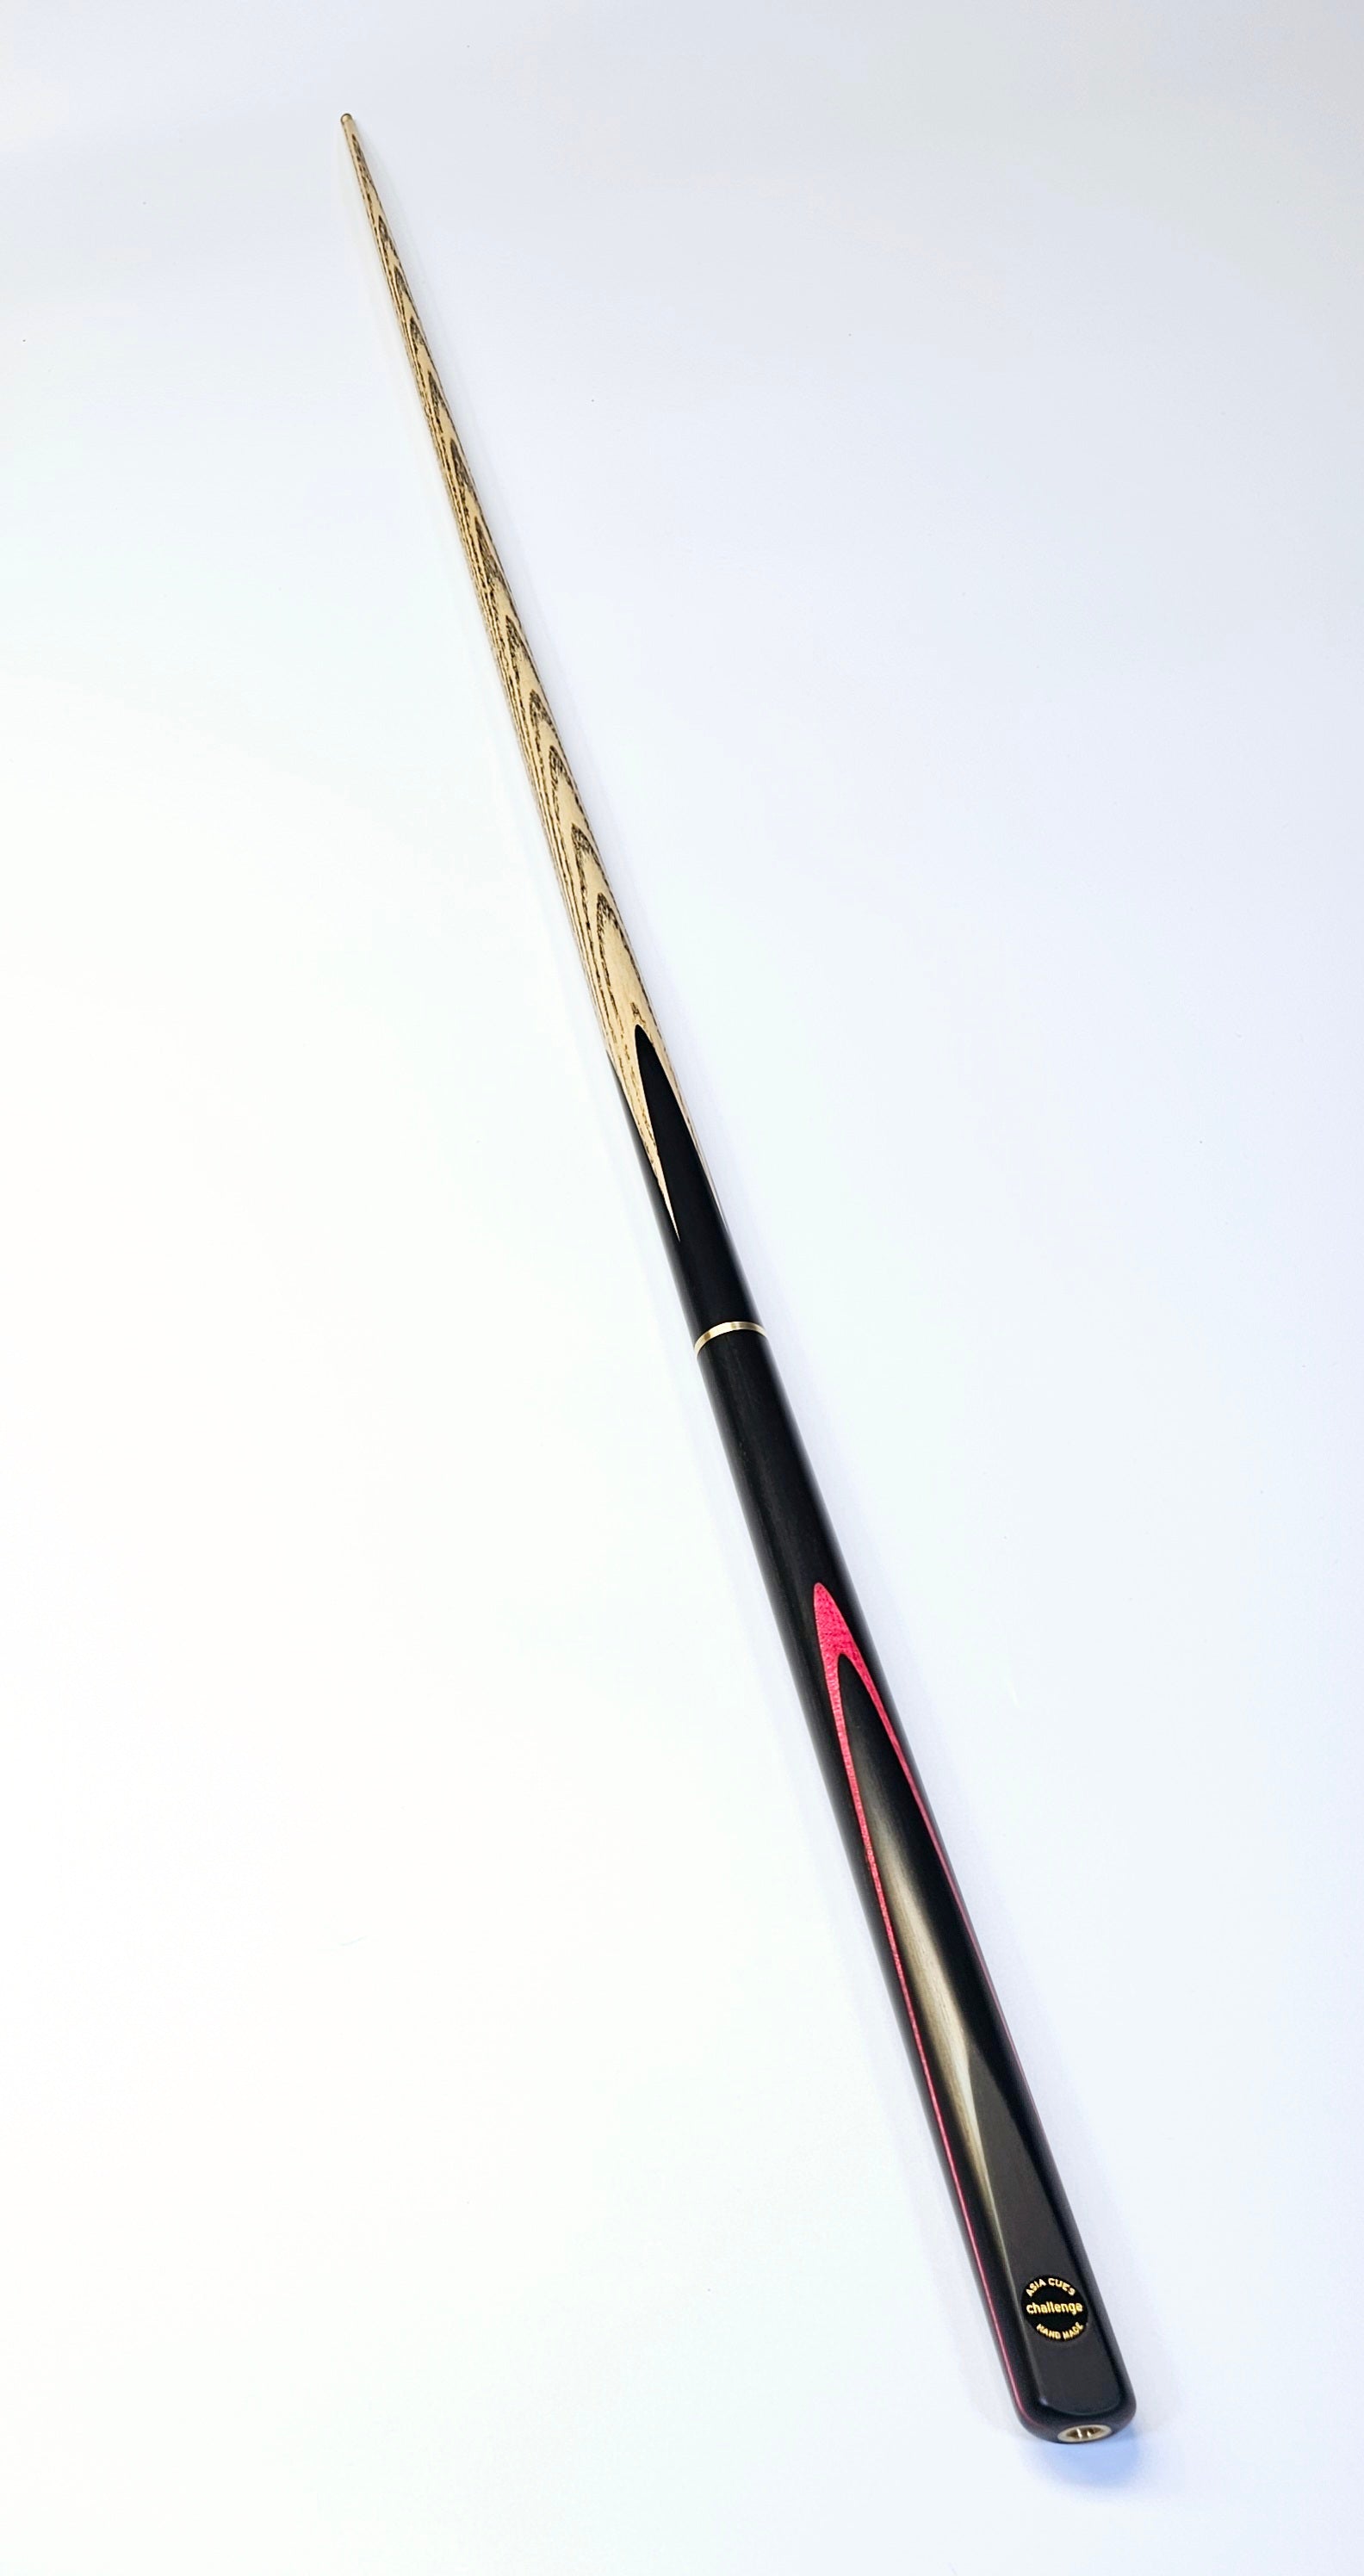 Asia Cues Challenge - 3/4 Jointed Pool Cue 8.7mm Tip, 18.2oz, 58"